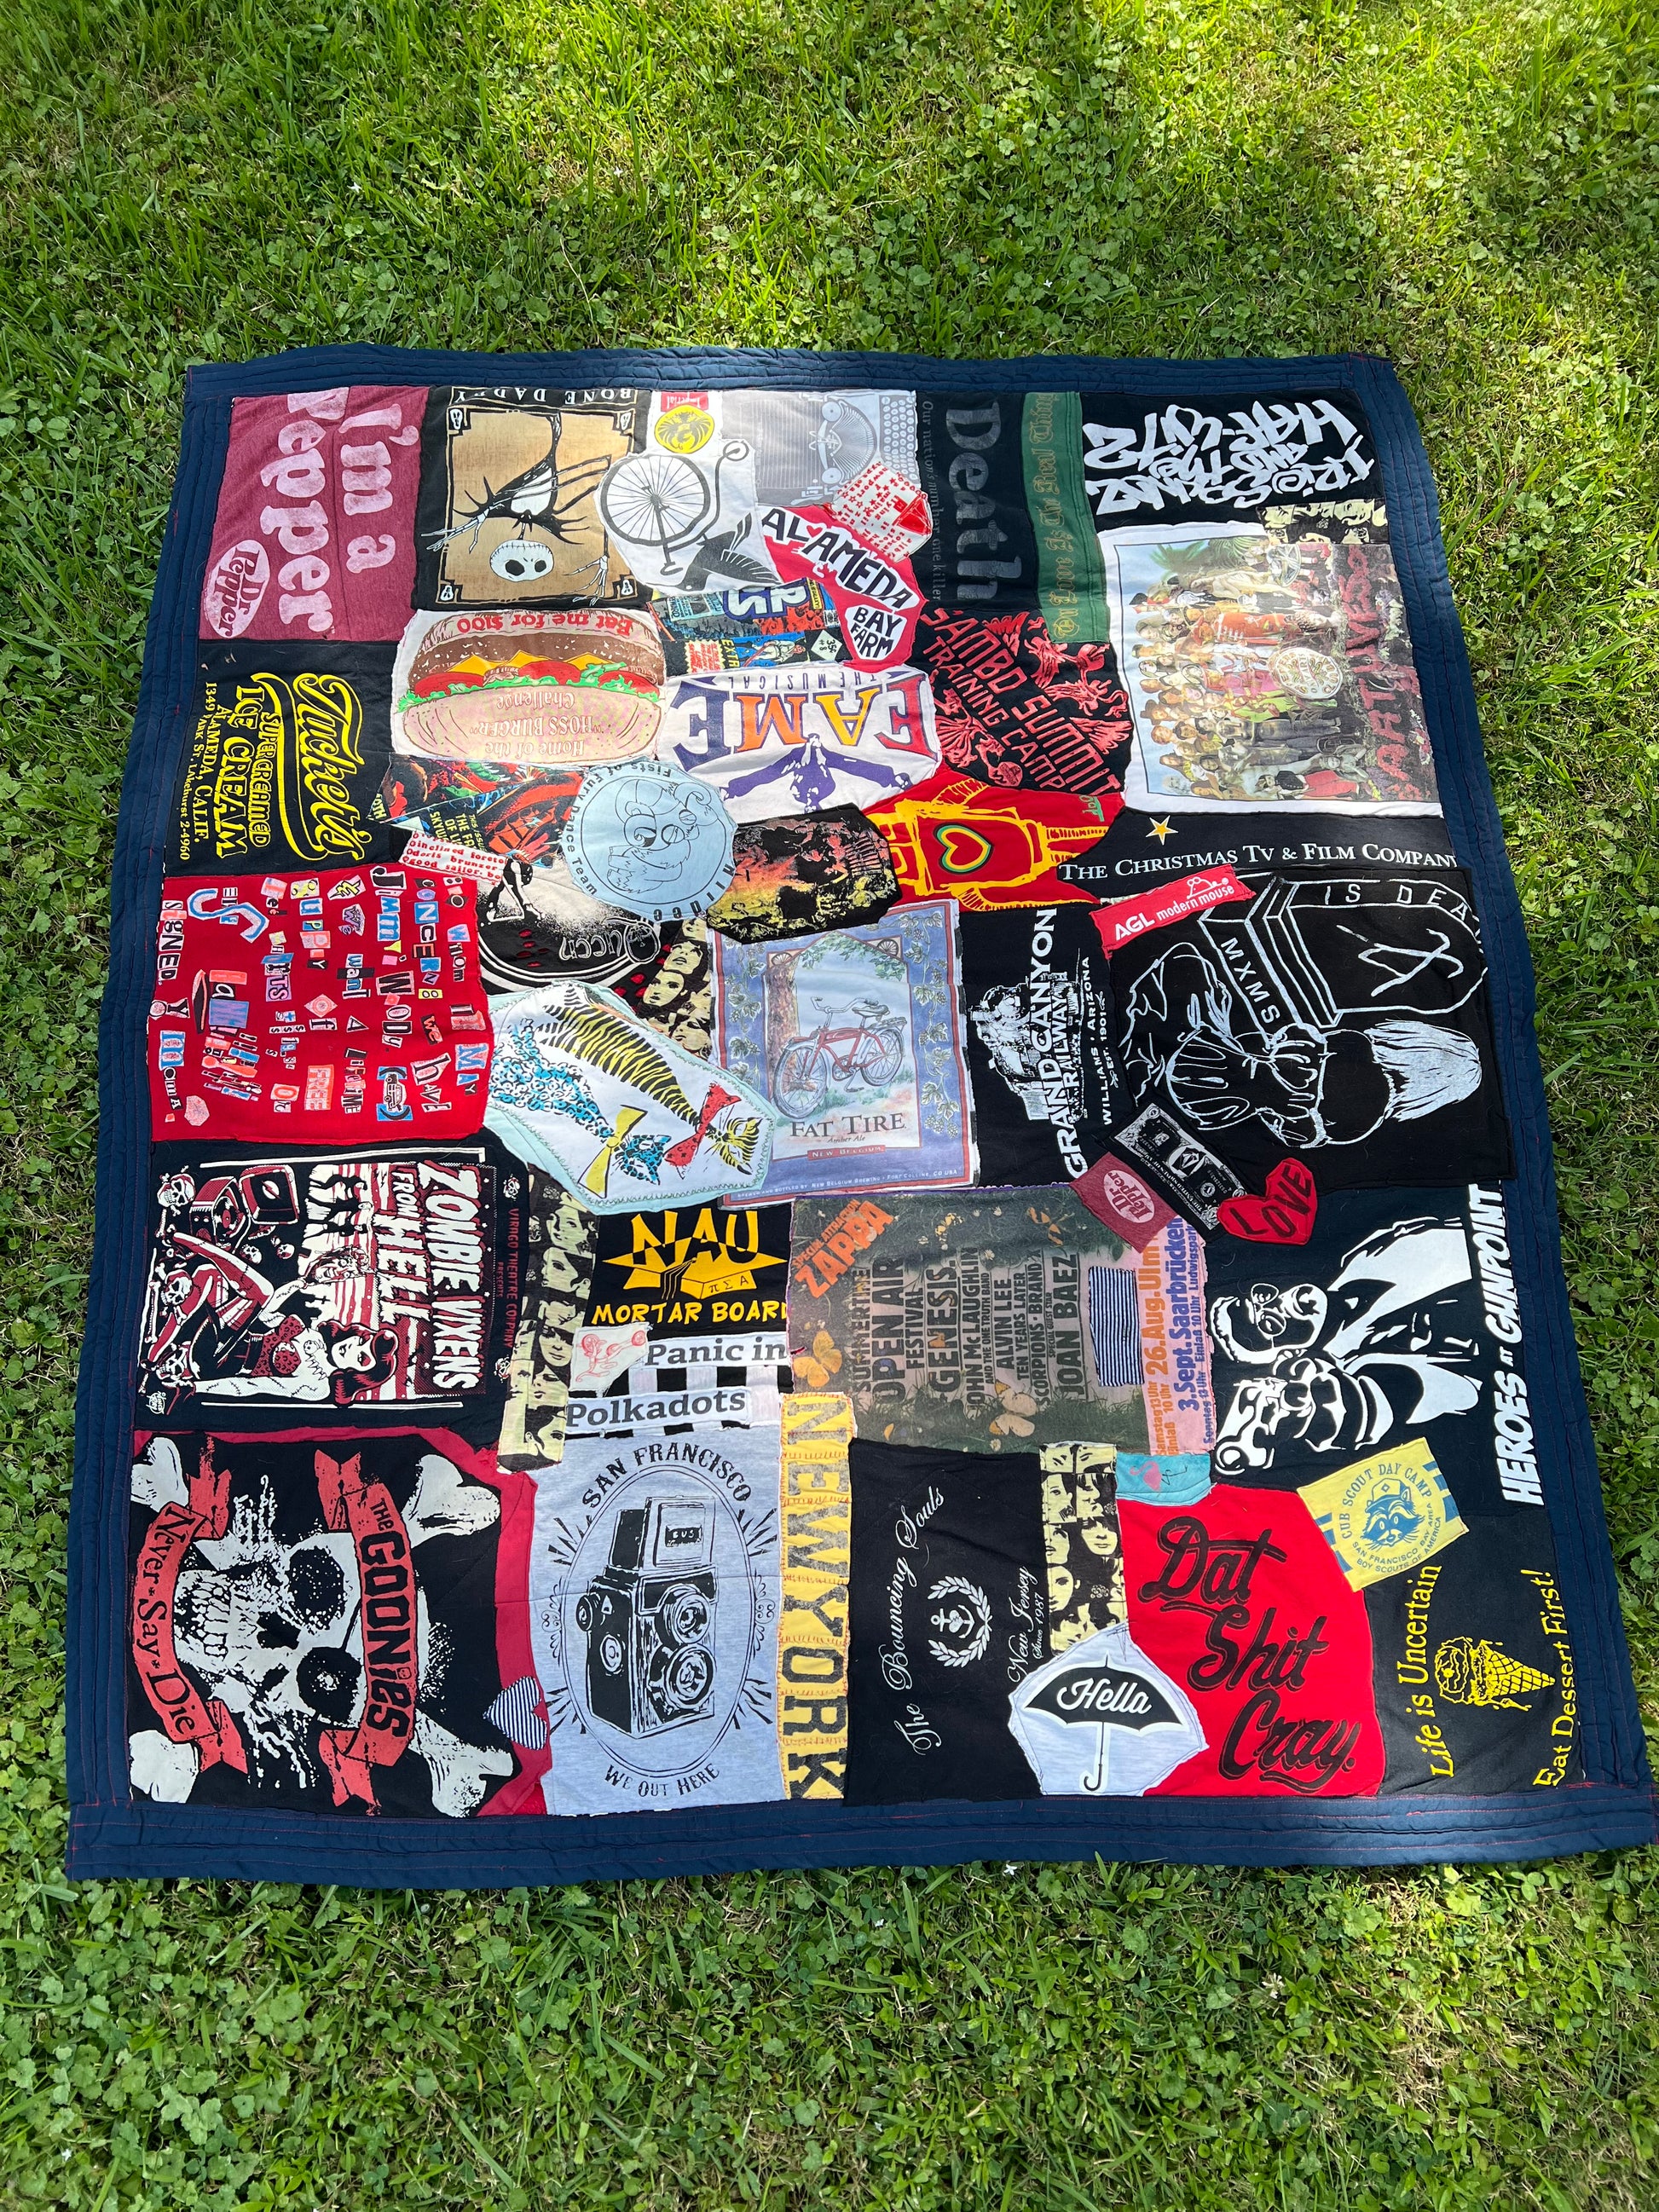 Various tshirts have been included in this tshirt quilt, such as the Goonies, Dr. Pepper, FAME (the musical), and Jack Skellington